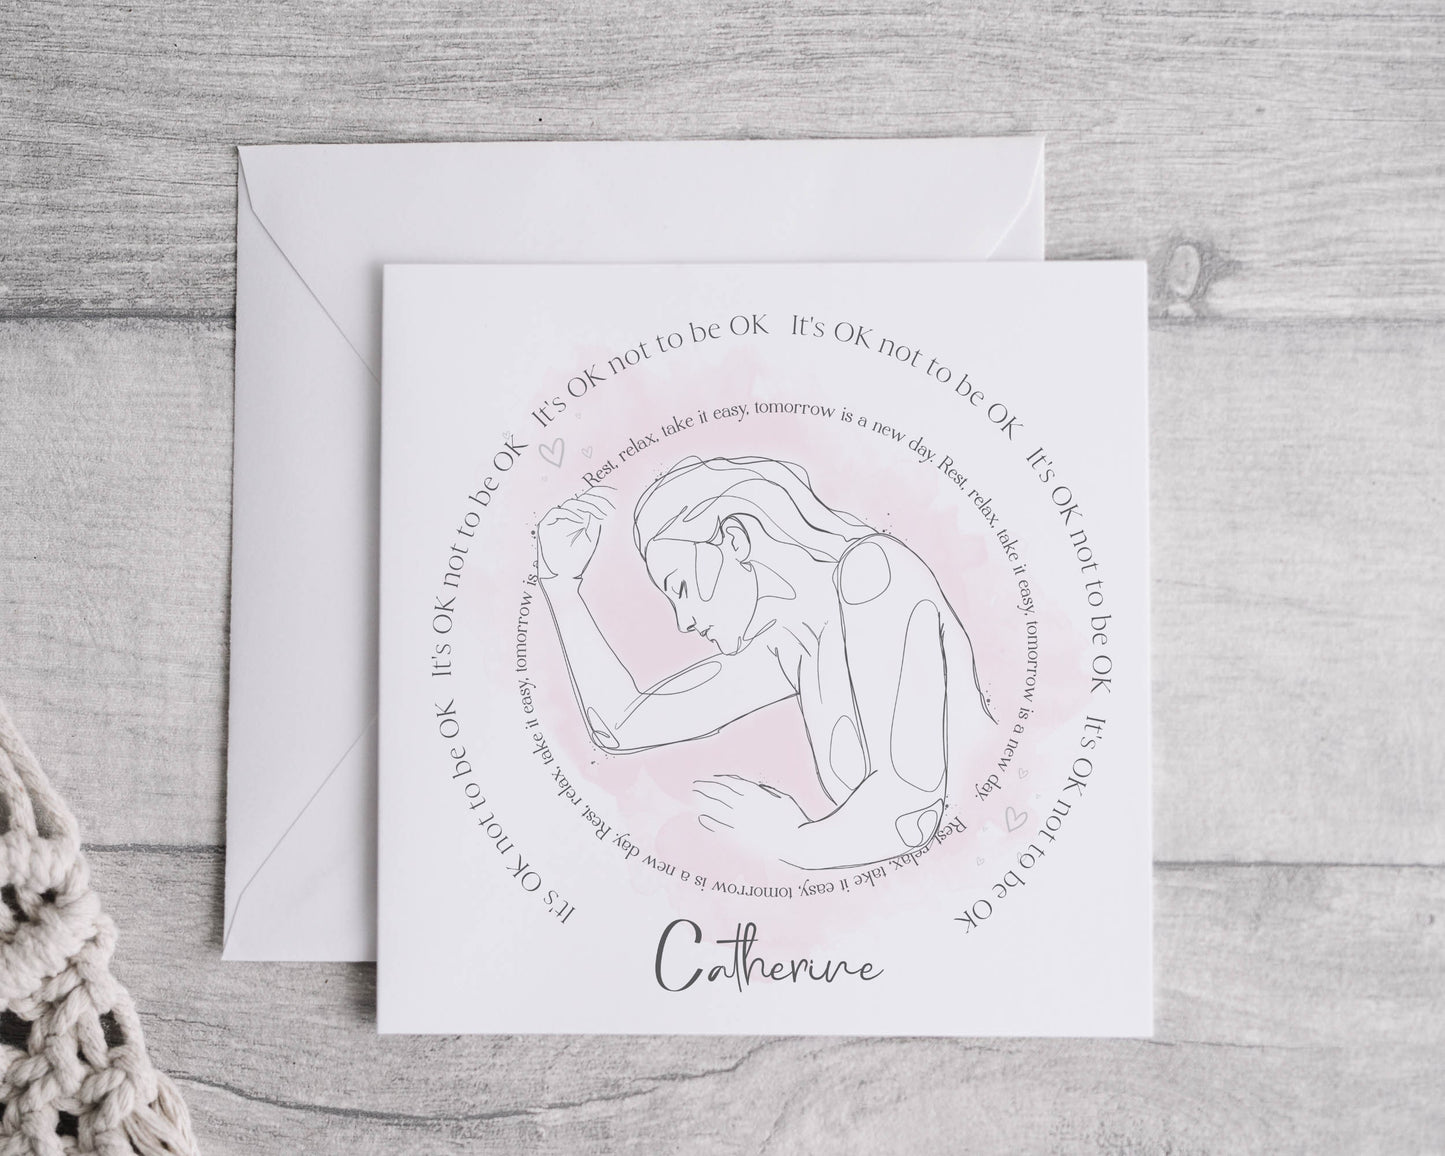 square card with an invisible illness image and circular text 'It's ok not to be ok', 'rest, relax, take it easy, tomorrow is a new day'